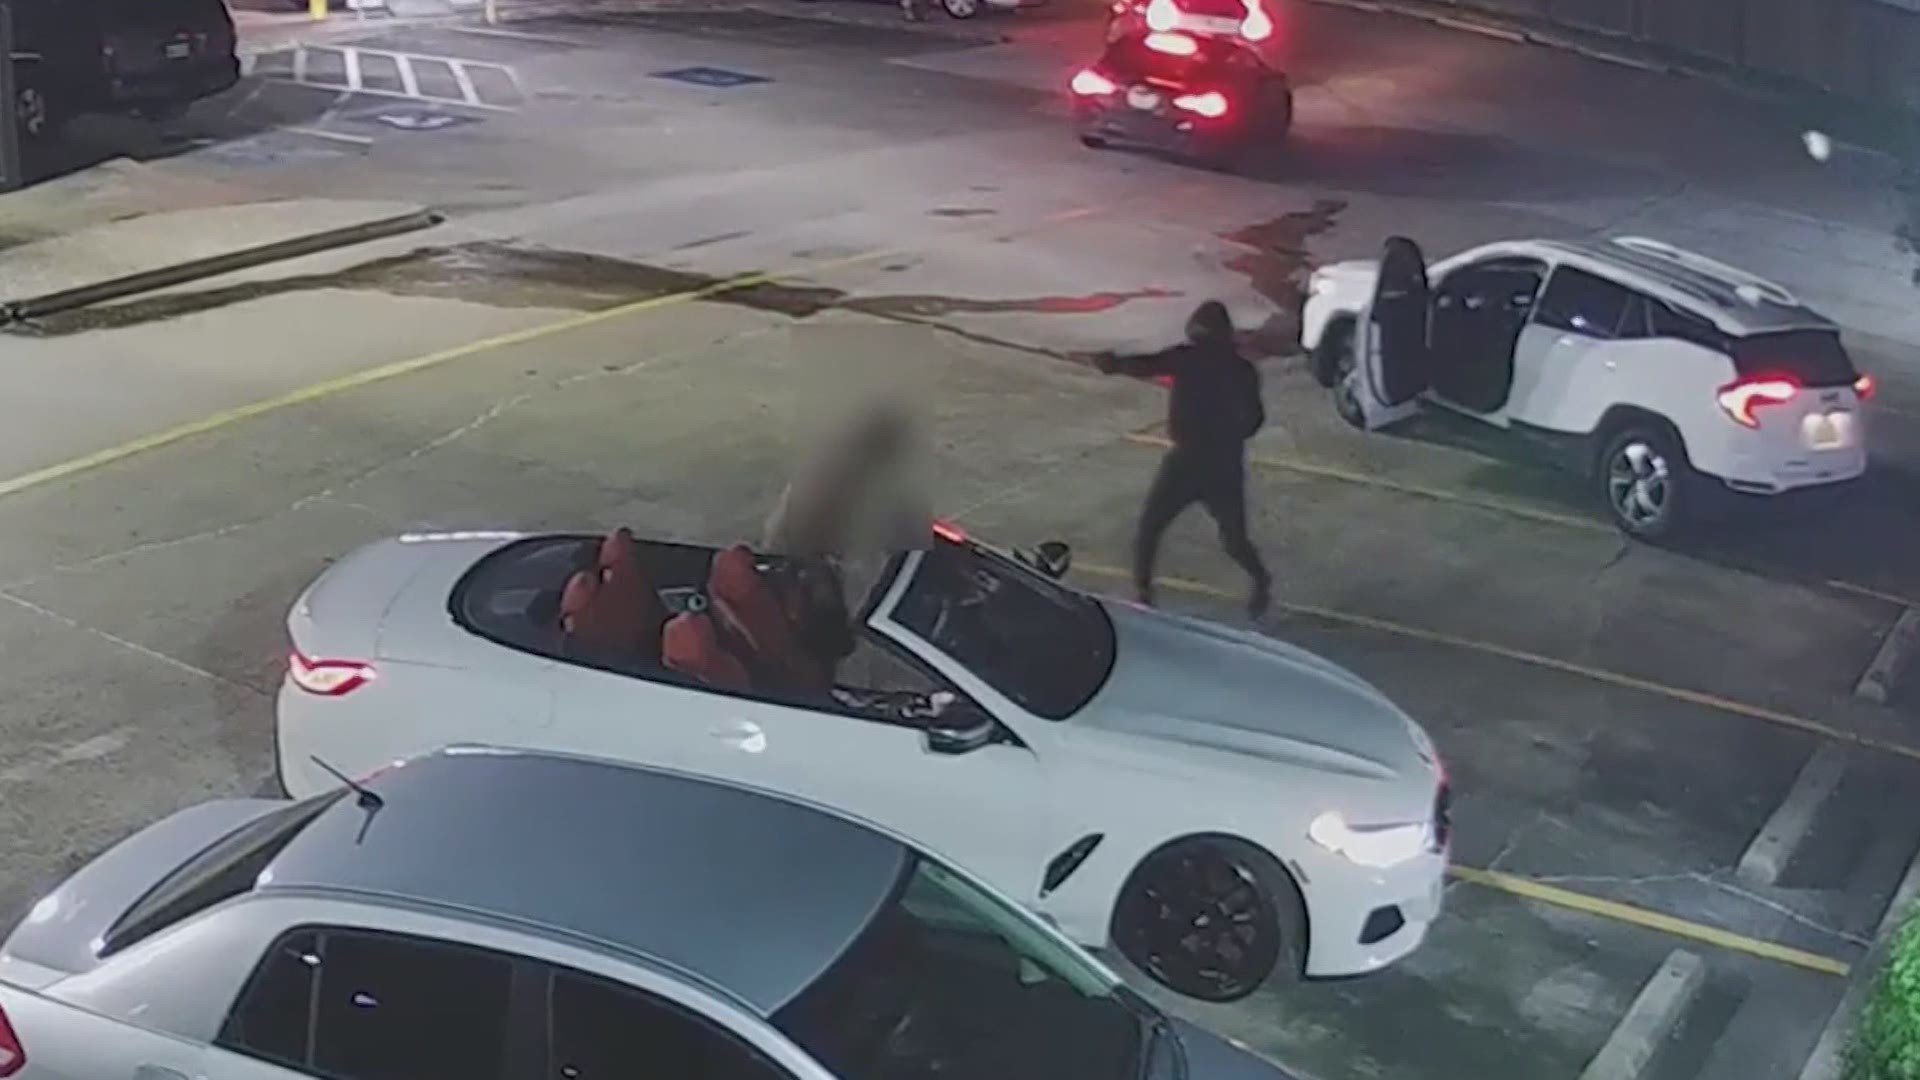 Like other recent robberies in the Houston area, police say the victim may have been targeted for his BMW or Rolex watch. Thankfully, he survived.